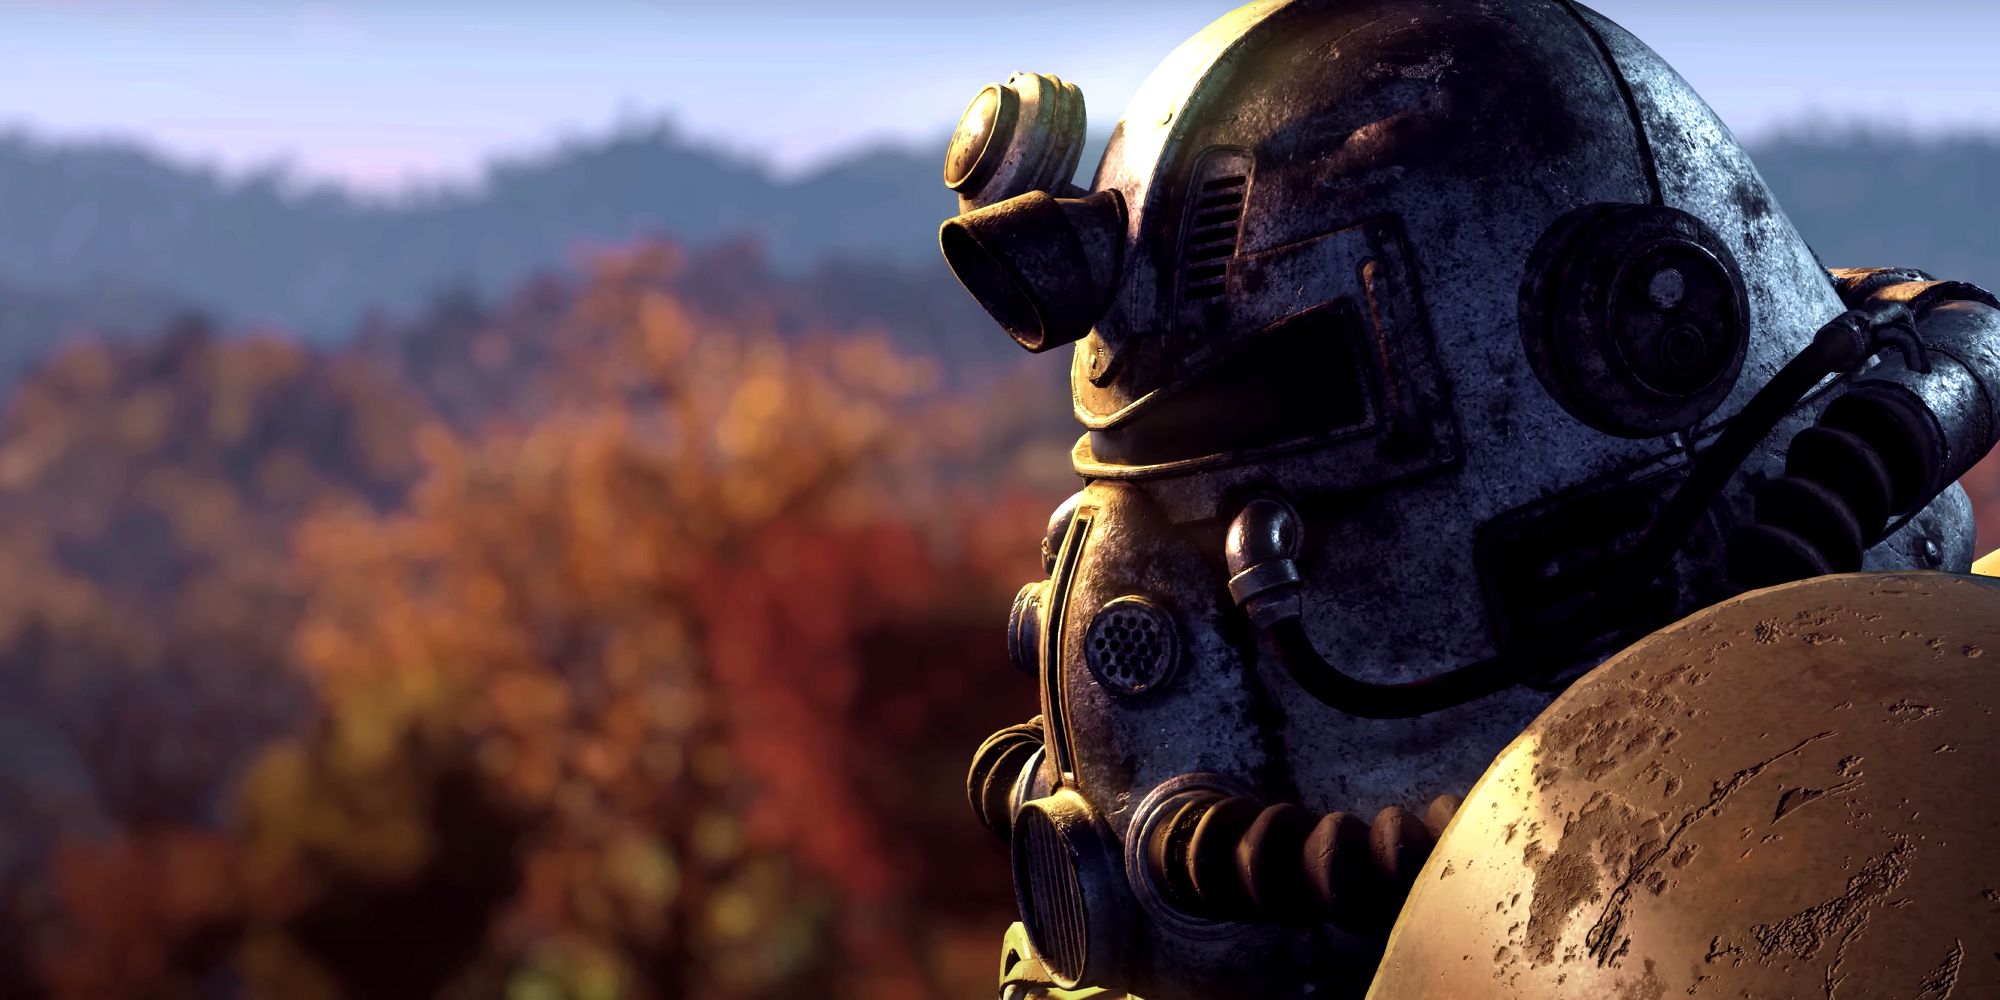 A cinematic screenshot of power armor in Fallout 76's Official Trailer with a forest background.